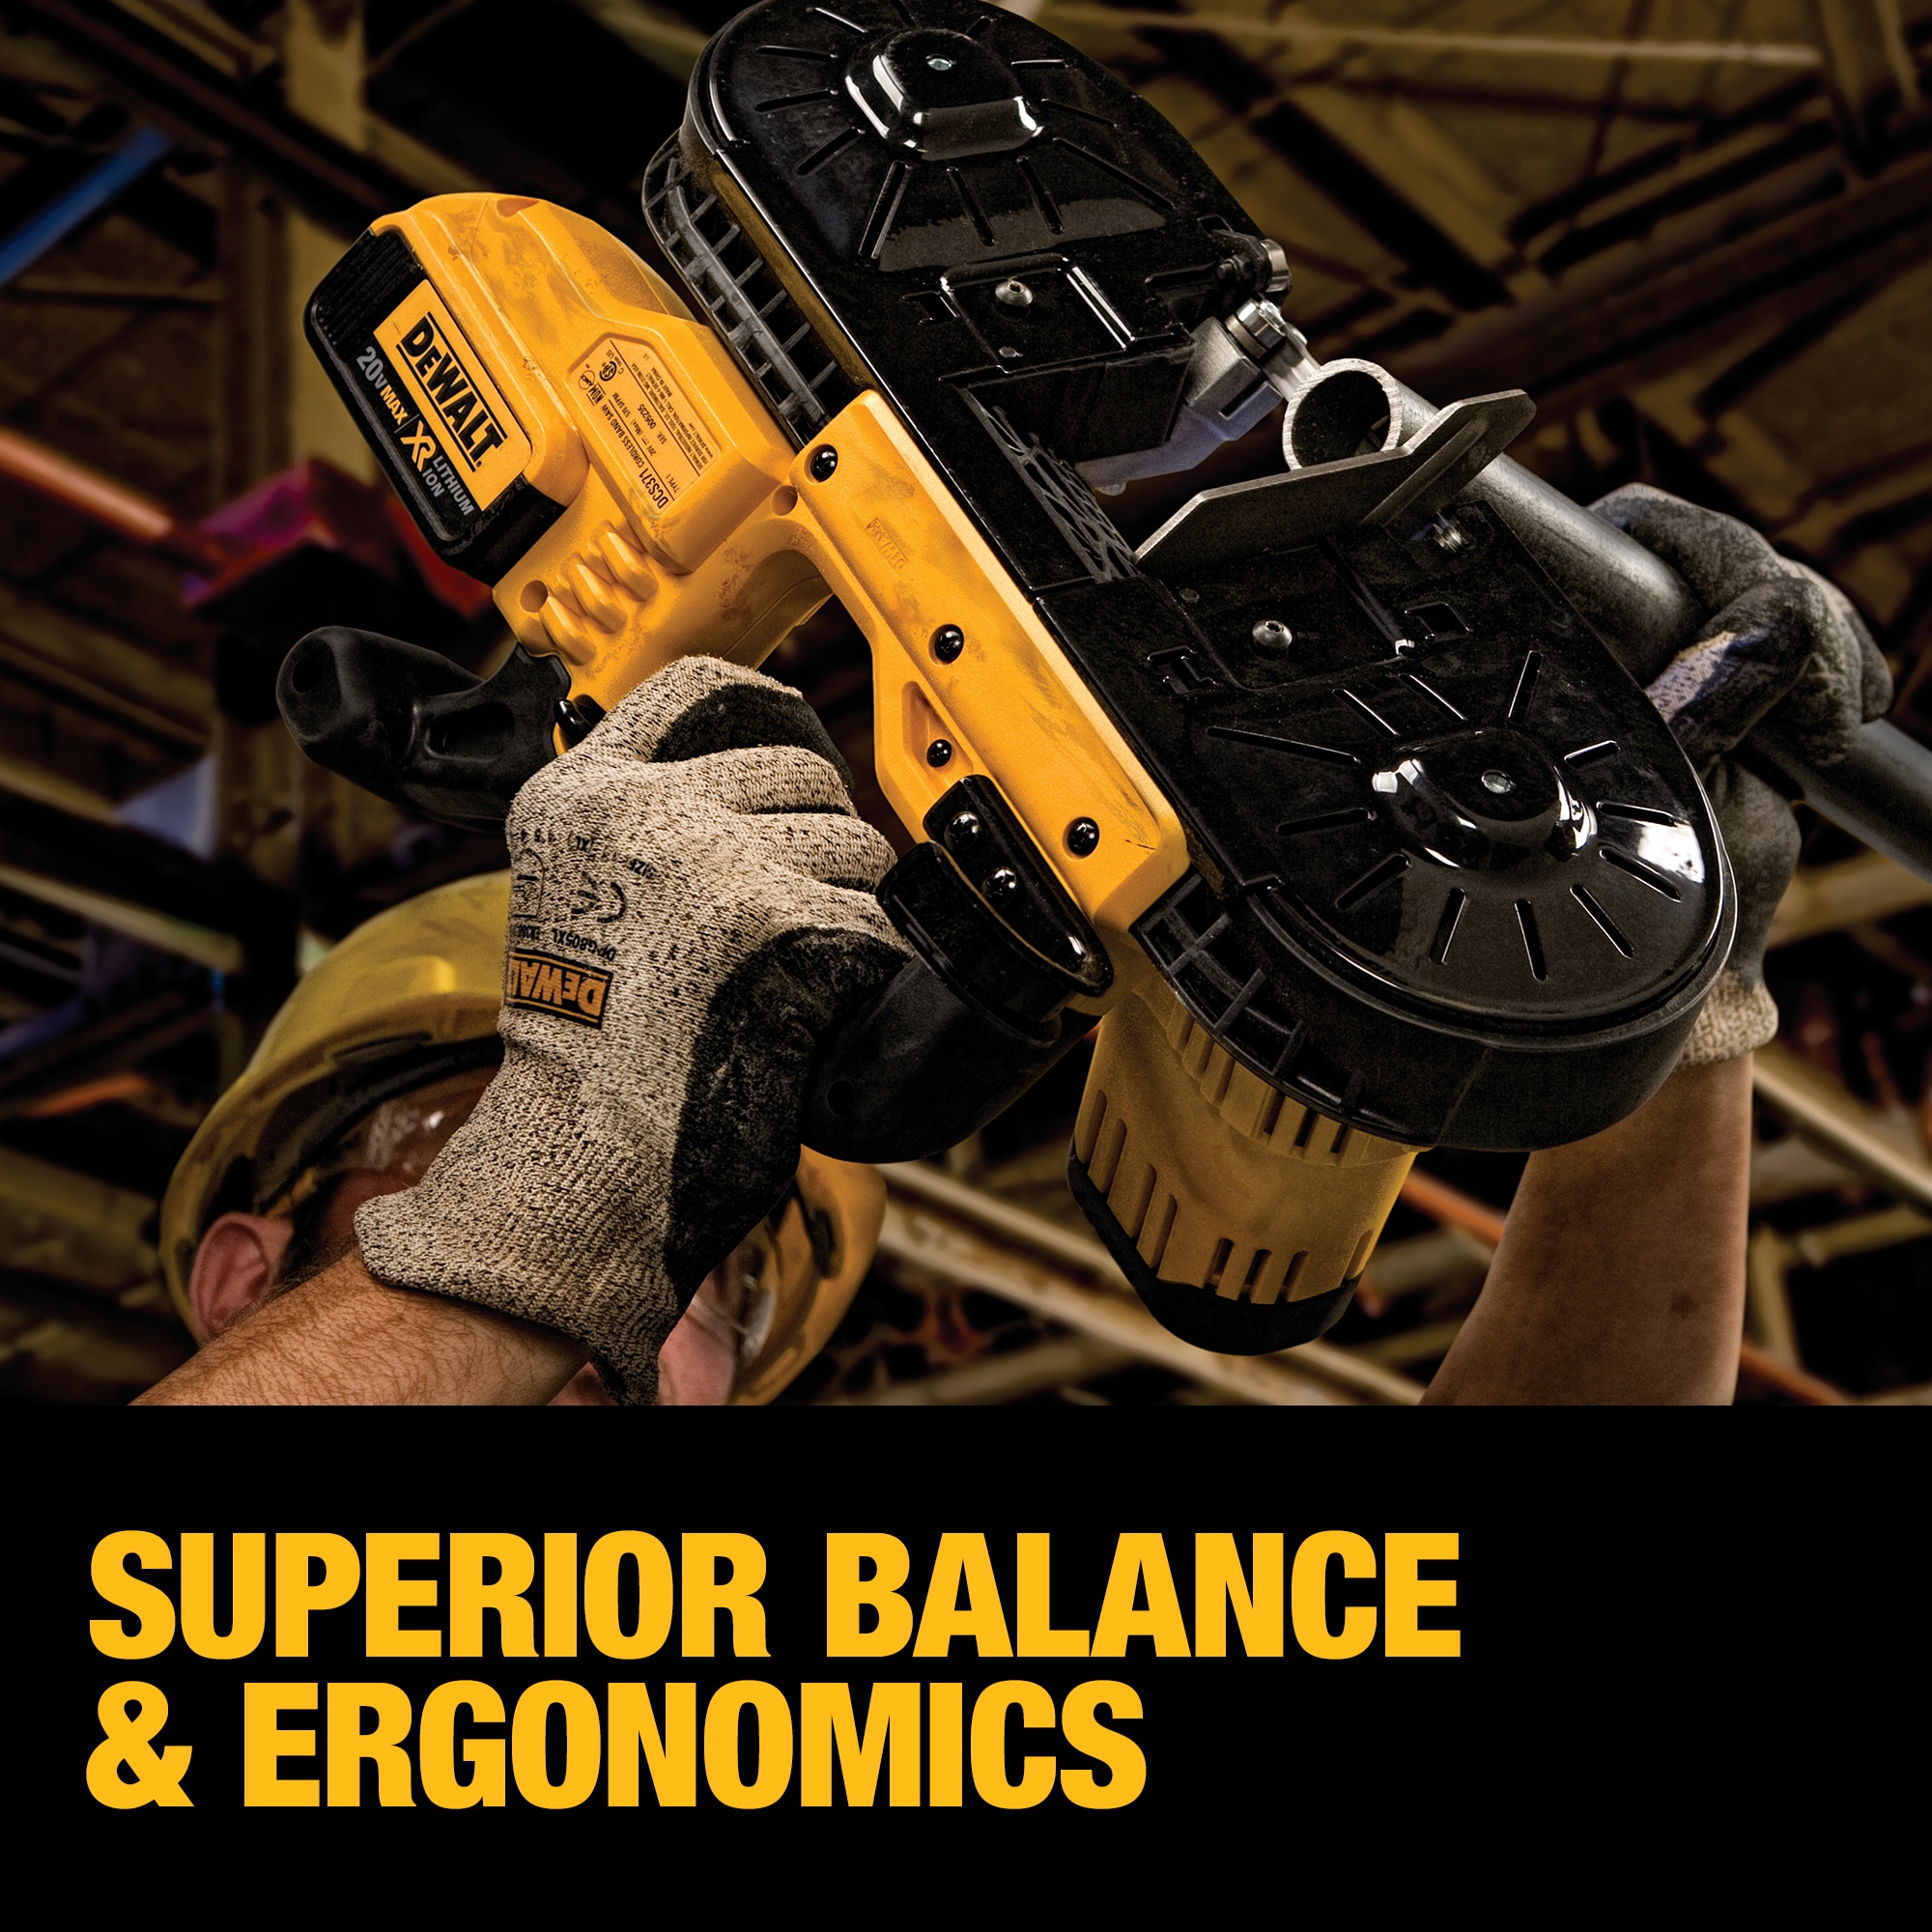 DEWALT 5 Amps 20-Volt 2.5-in Portable Band Saw in the Portable